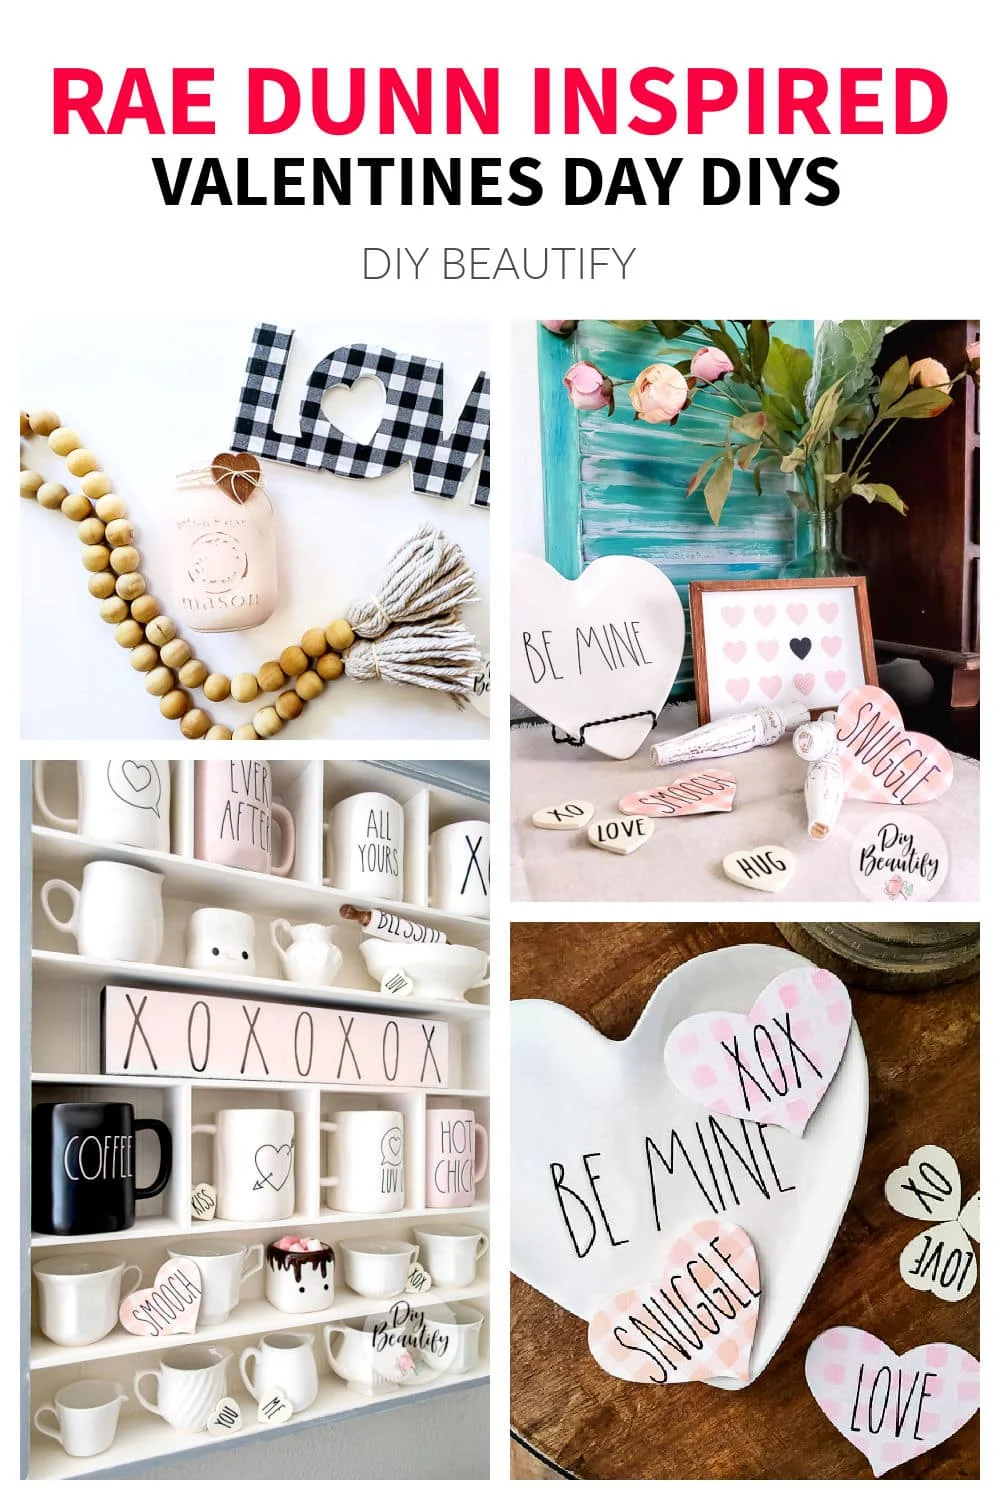 Rae Dunn inspired Valentines Day DIY projects